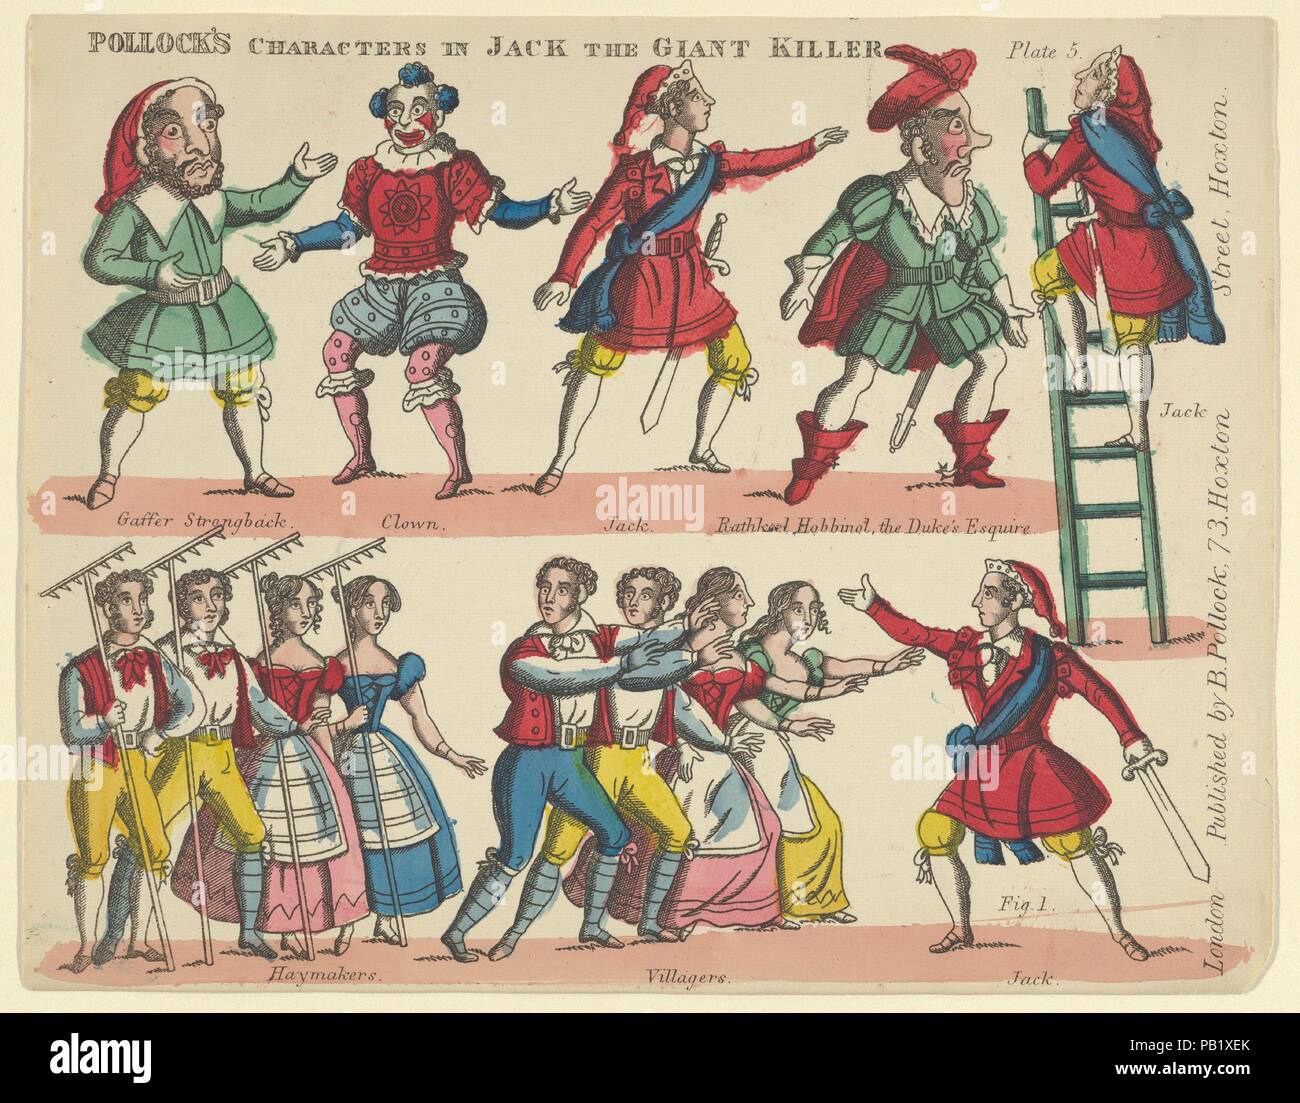 Characters, from Jack and the Giant Killer, Plate 5 for a Toy Theater. Dimensions: Sheet: 6 11/16 × 8 7/16 in. (17 × 21.4 cm). Publisher: Benjamin Pollock (British, 1857-1937). Date: 1870-90. Museum: Metropolitan Museum of Art, New York, USA. Stock Photo